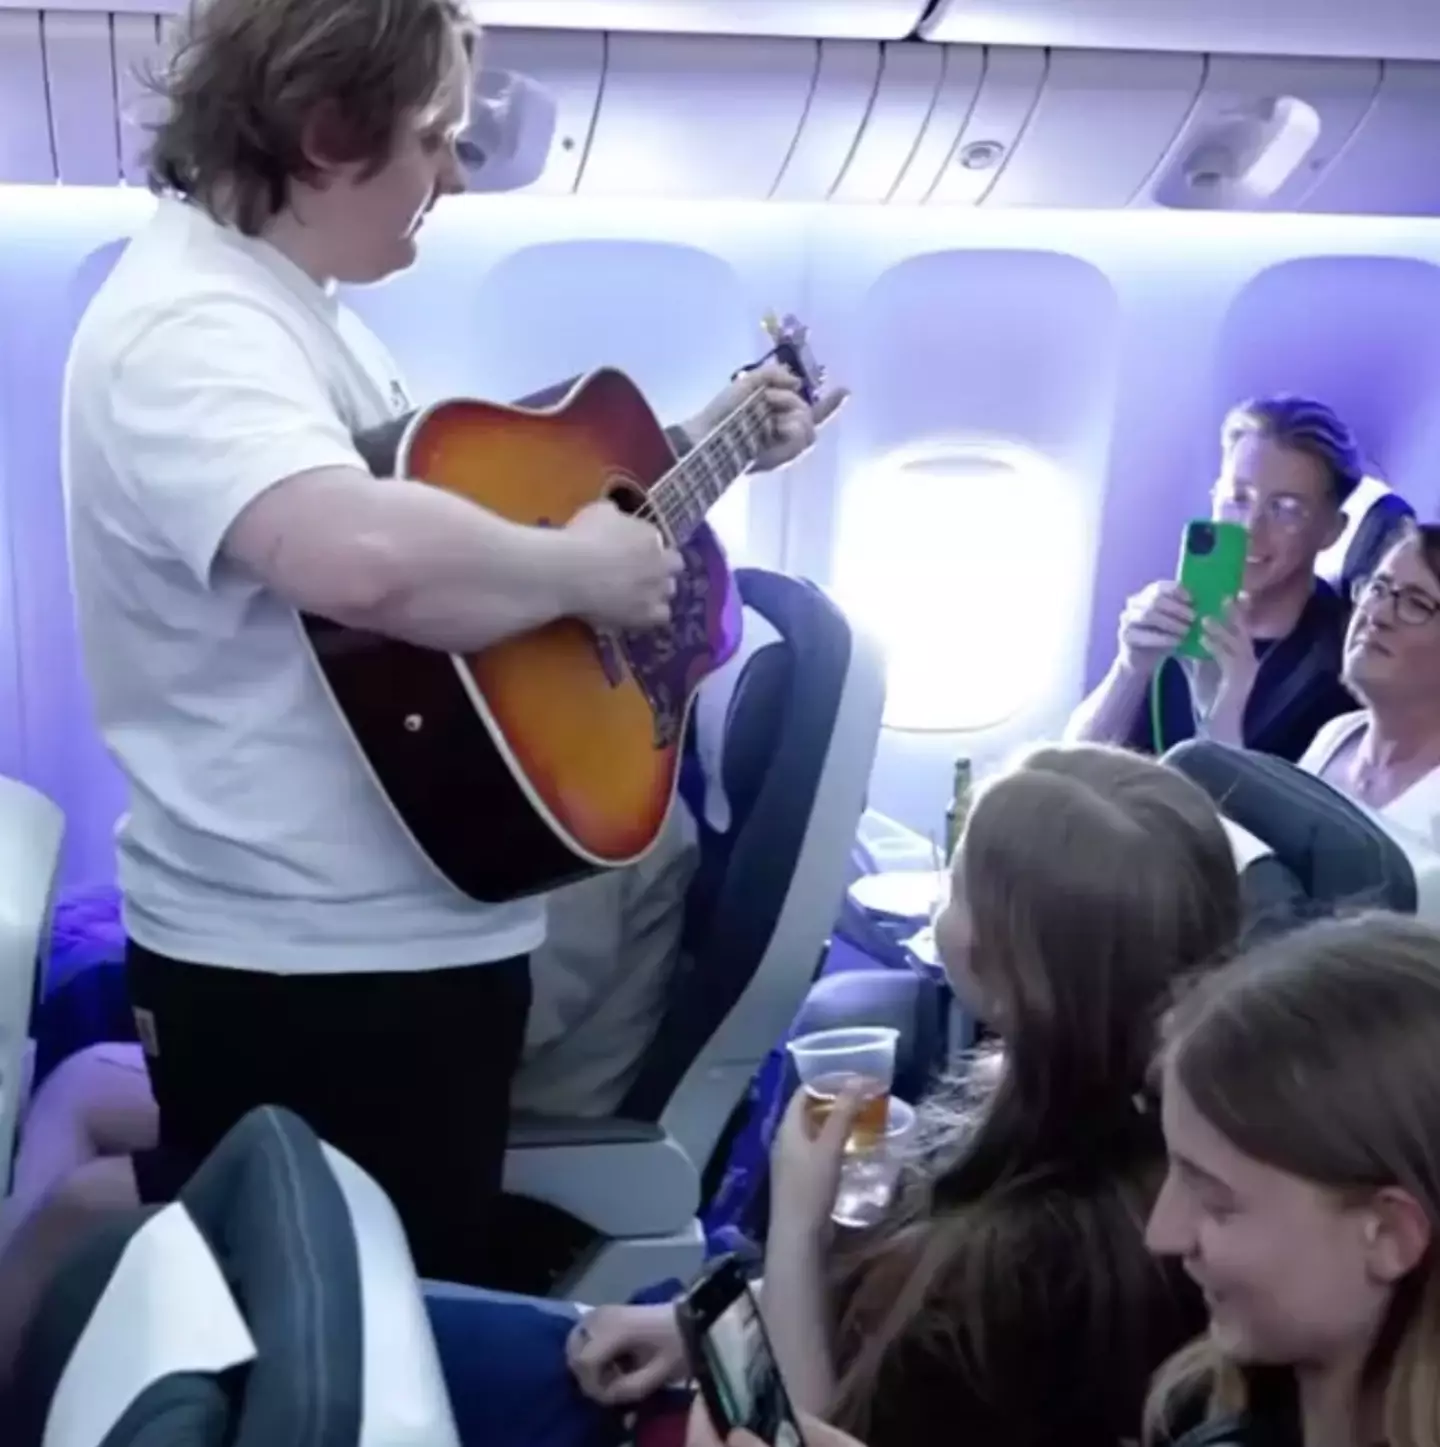 The popstar recently serenaded a plane full of passengers.